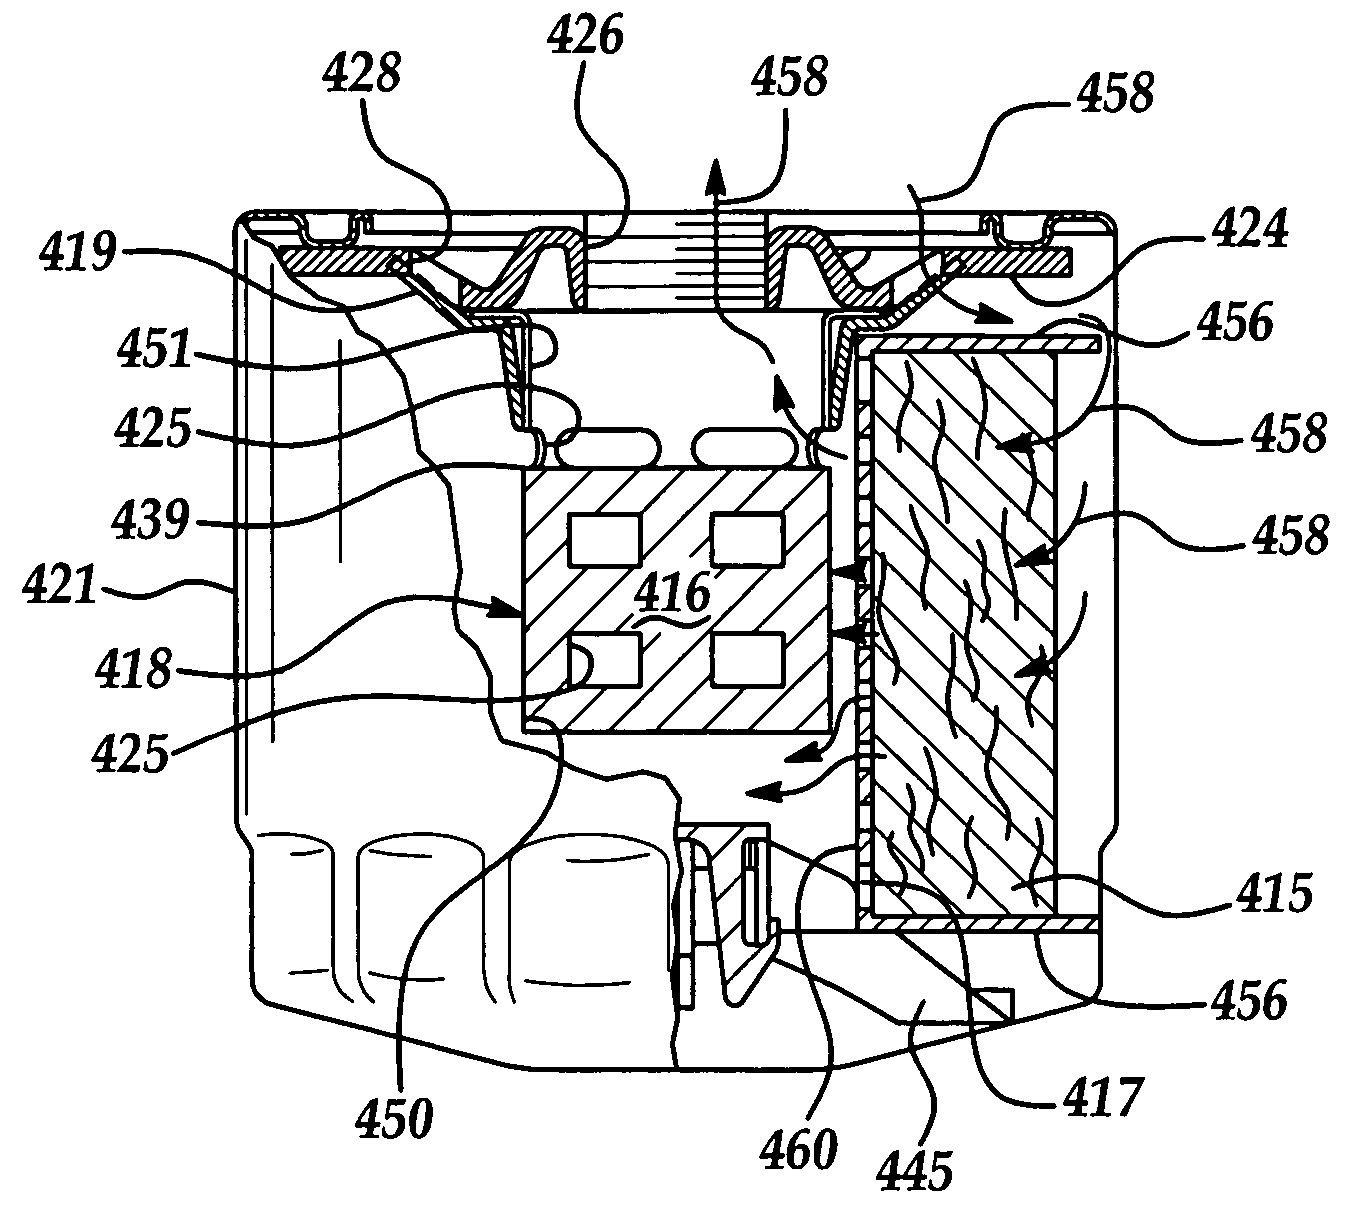 Additive dispersing filter and method of making